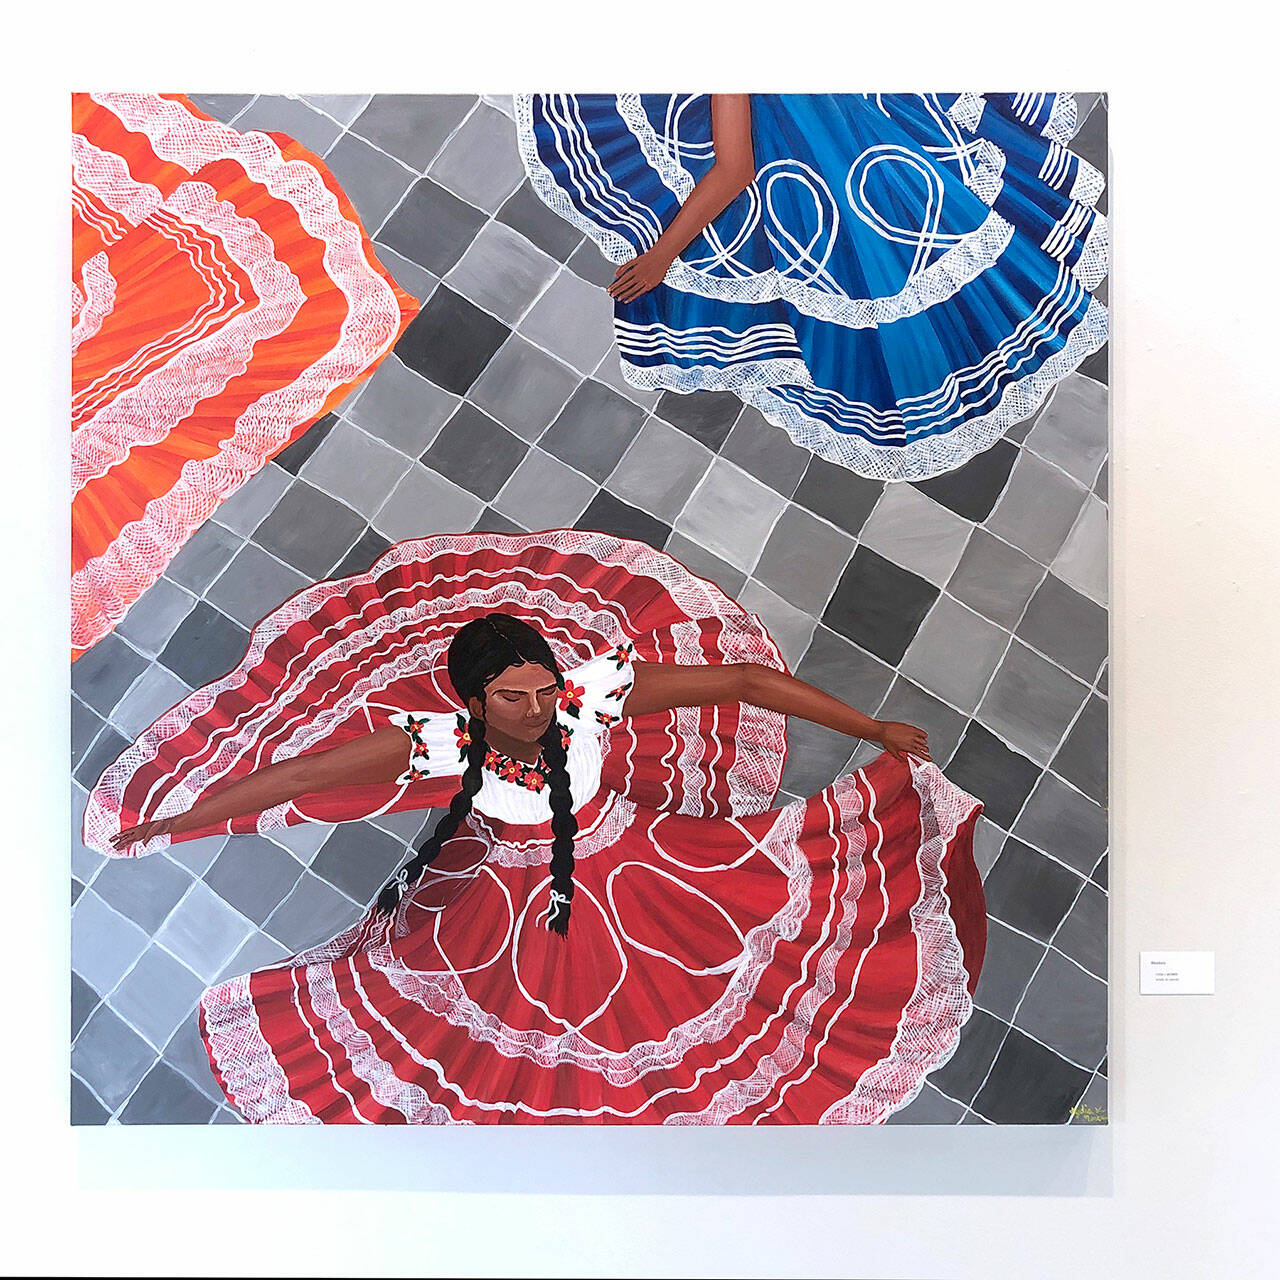 Lydia L. Morris’ acrylic on canvas painting “Bailadora” earned Best of Show and the President’s Merit Award at the PUB Gallery of Arts 2023 Student Art show.